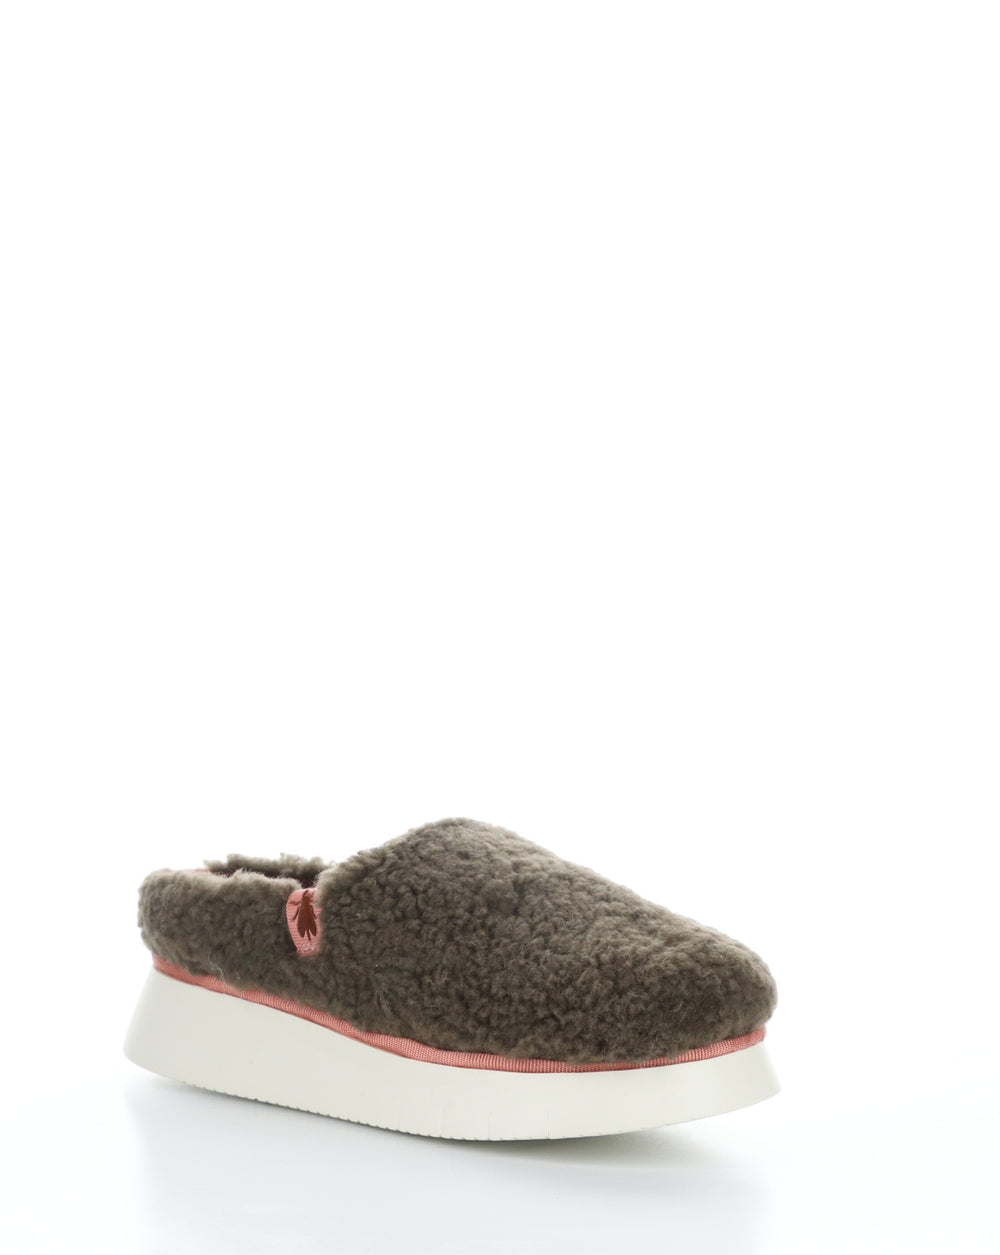 CAFE360FLY 004 BROWN/ROSE Slip-on Mules